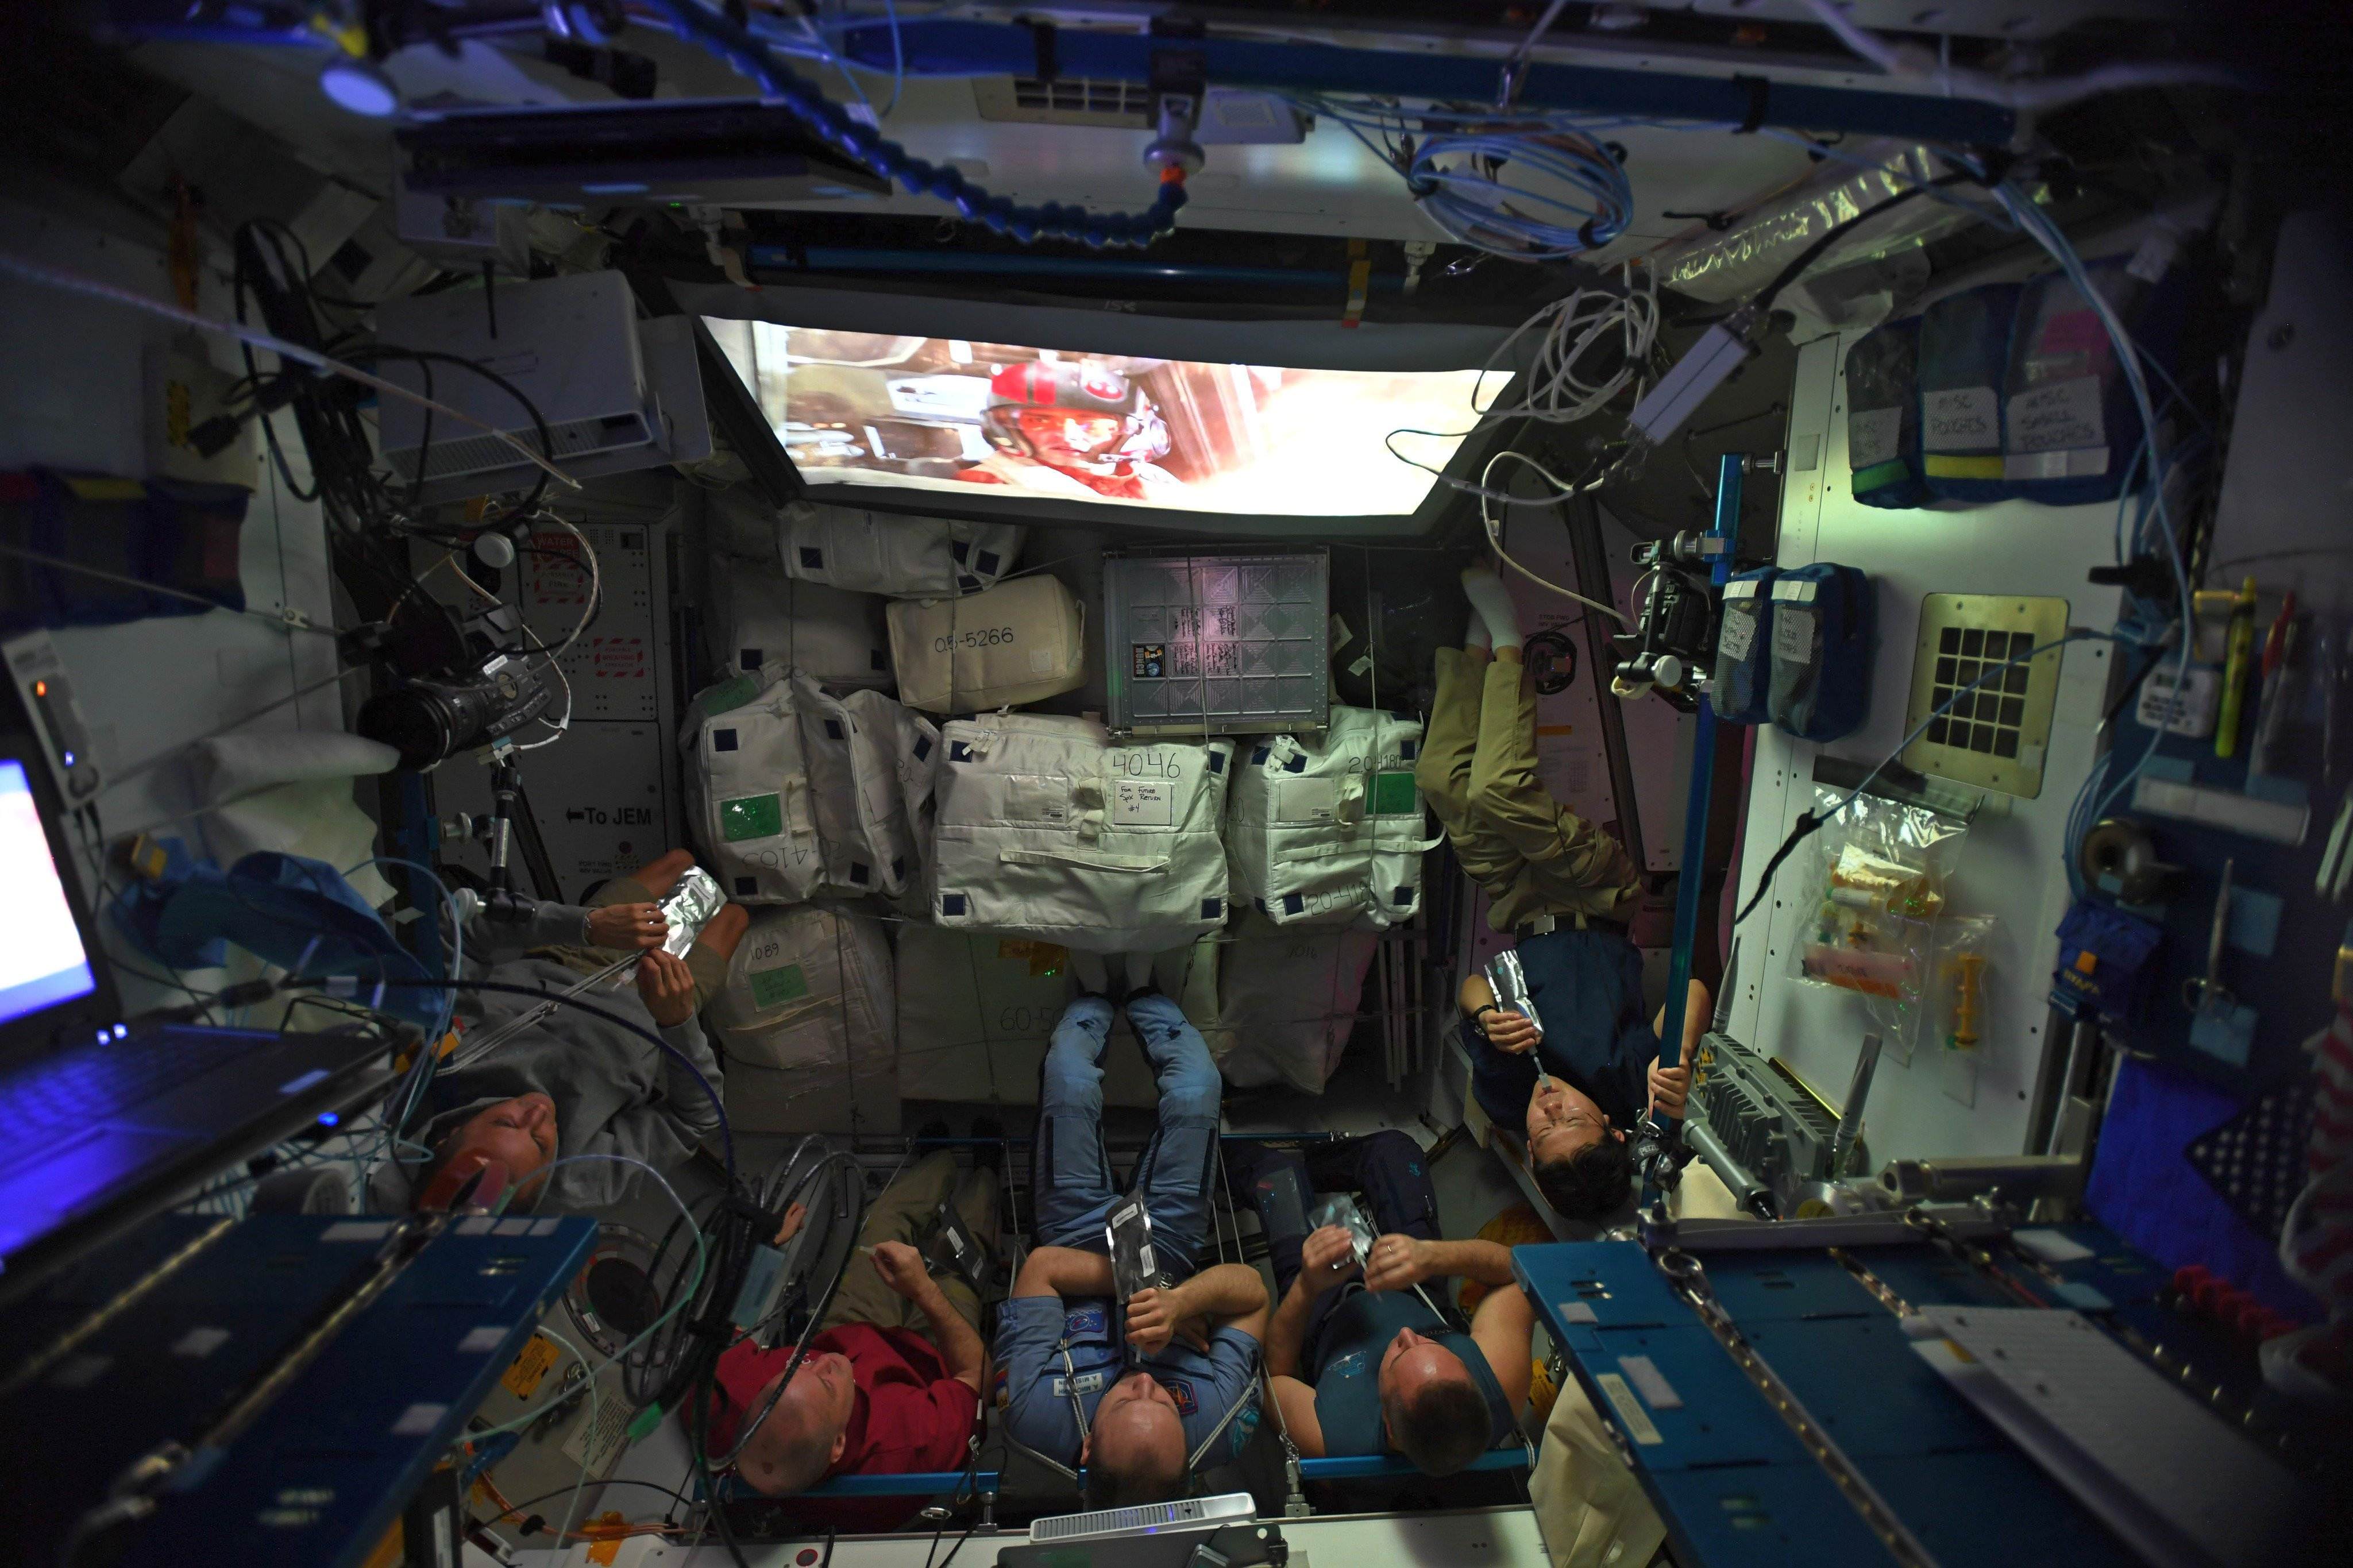 Astronauts watching Star Wars on the ISS / Boing Boing4096 x 2730